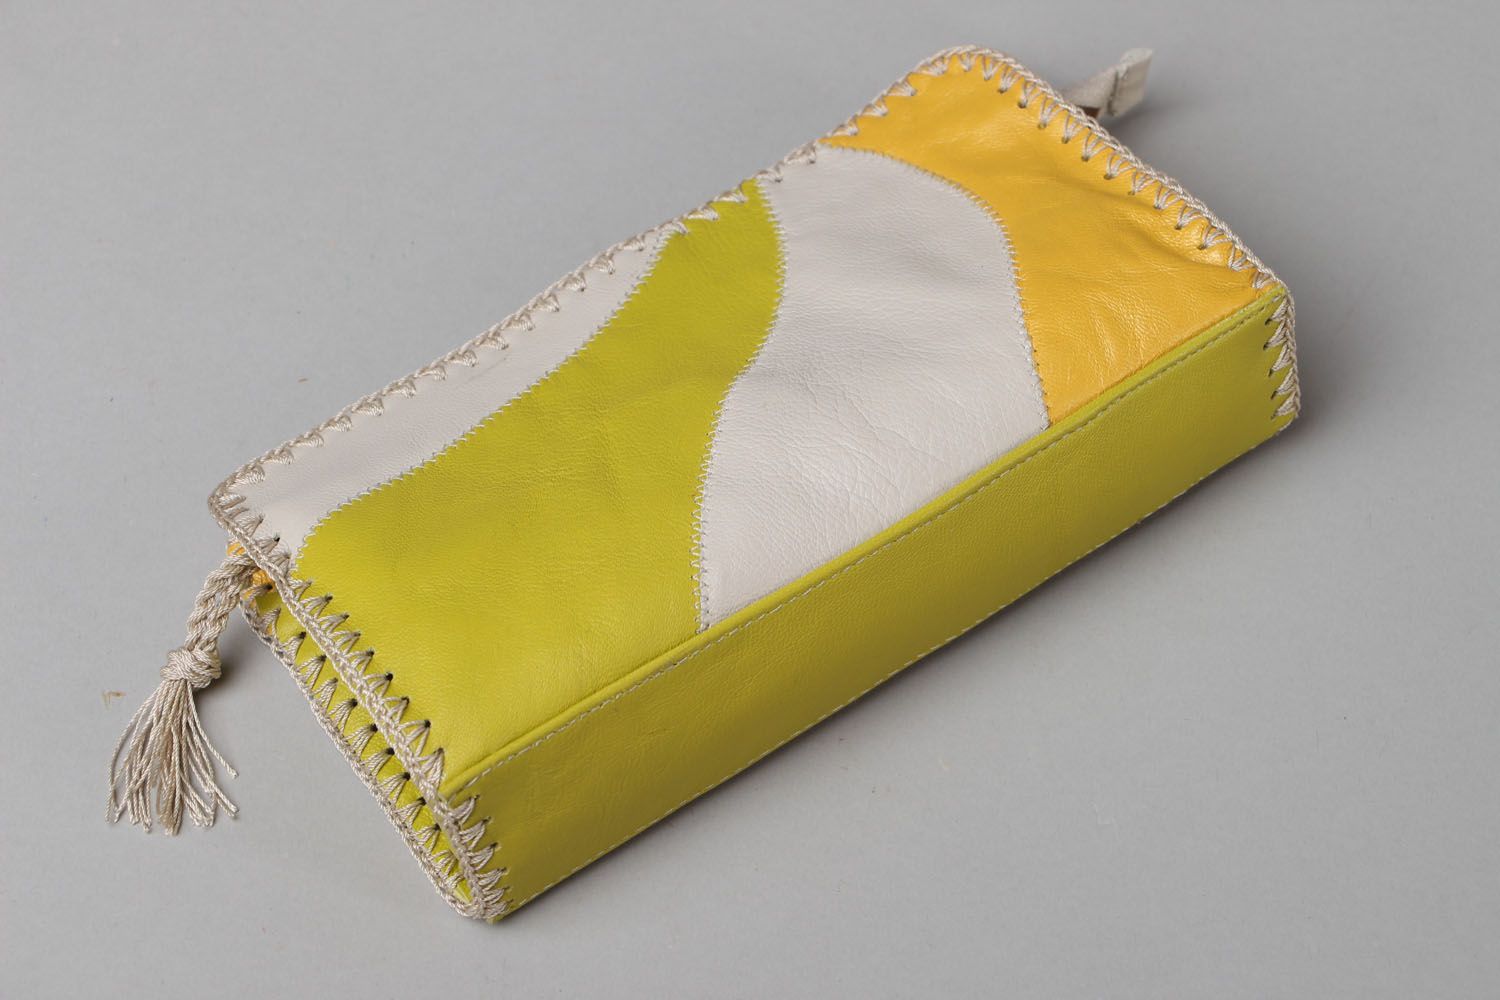 Yellow and white leather beauty bag photo 3